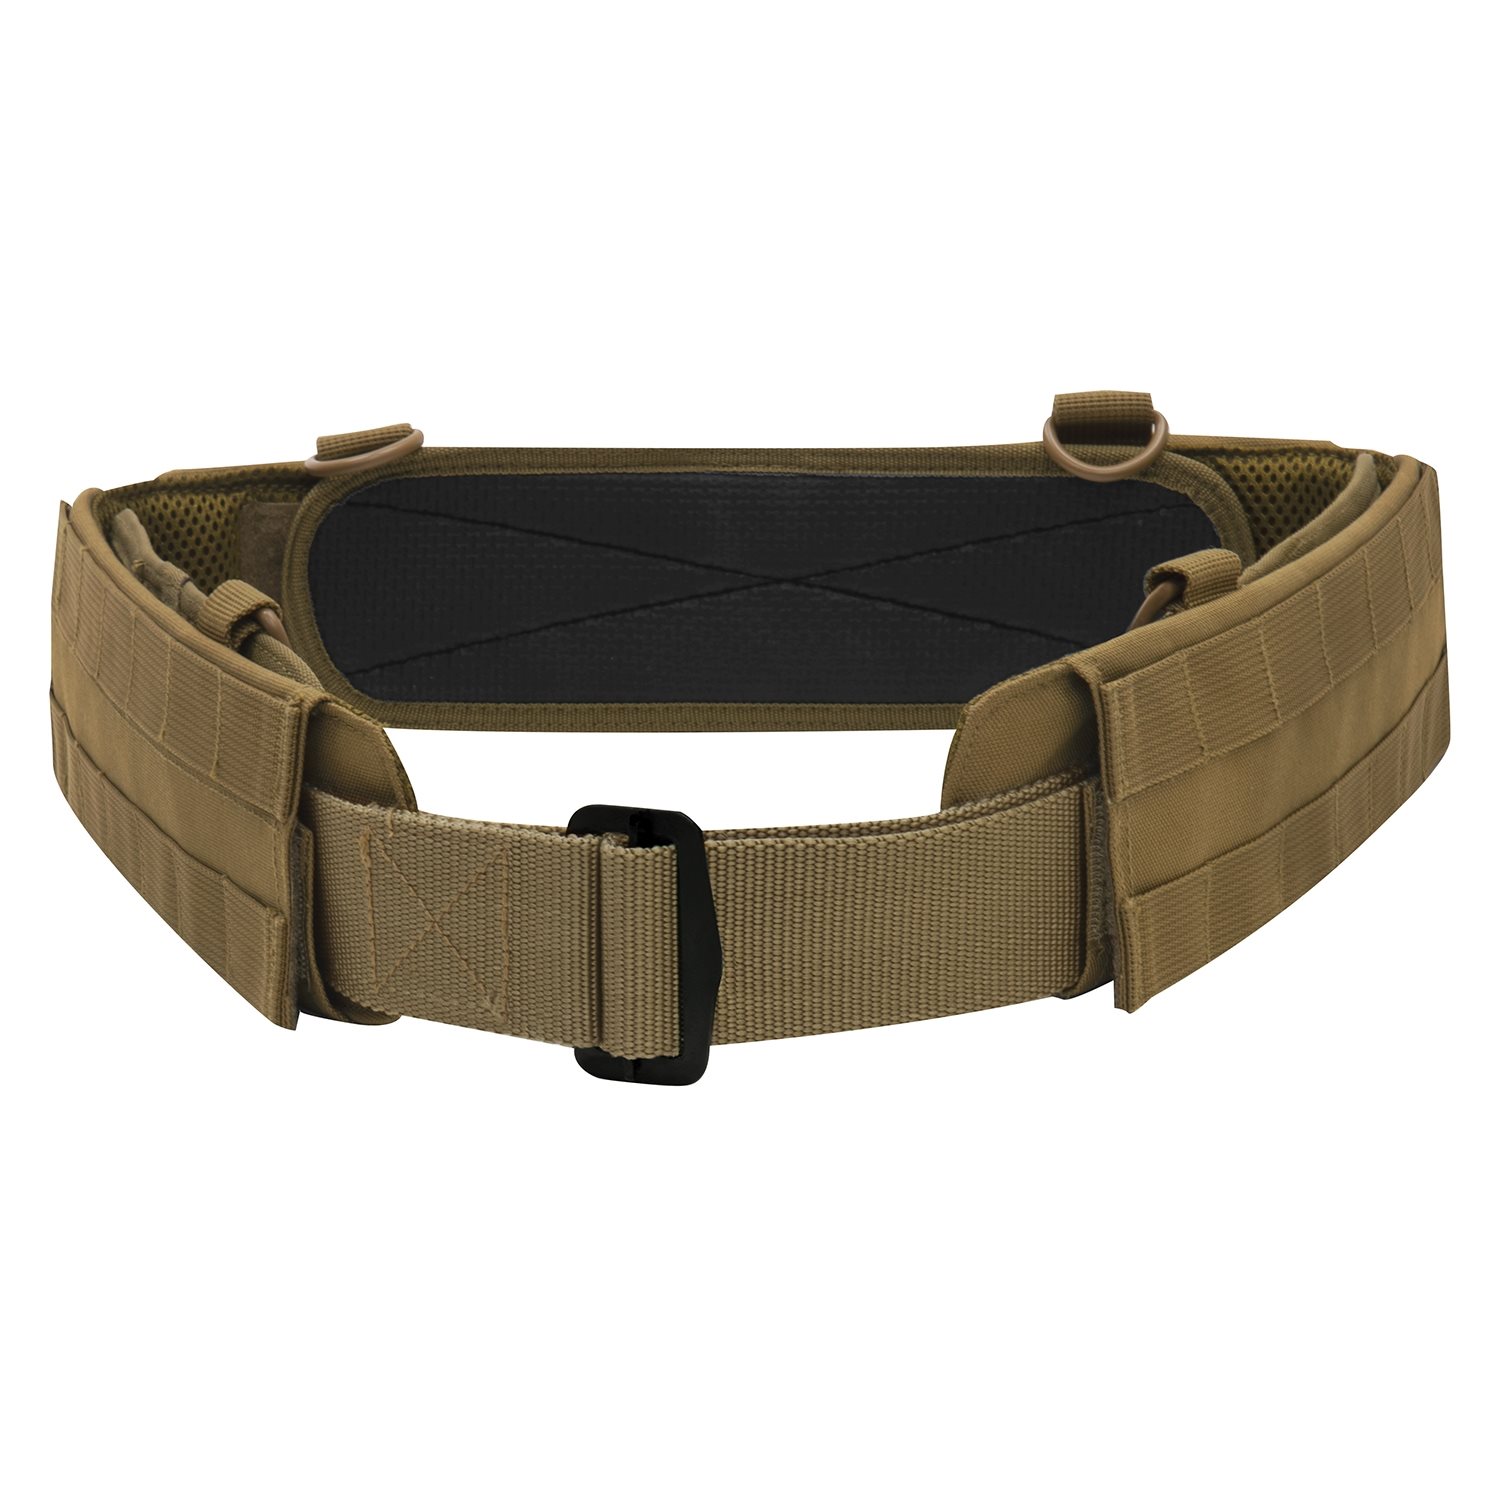 ROTHCO MOLLE Low Profile Tactical Battle Belt COYOTE | MILITARY RANGE